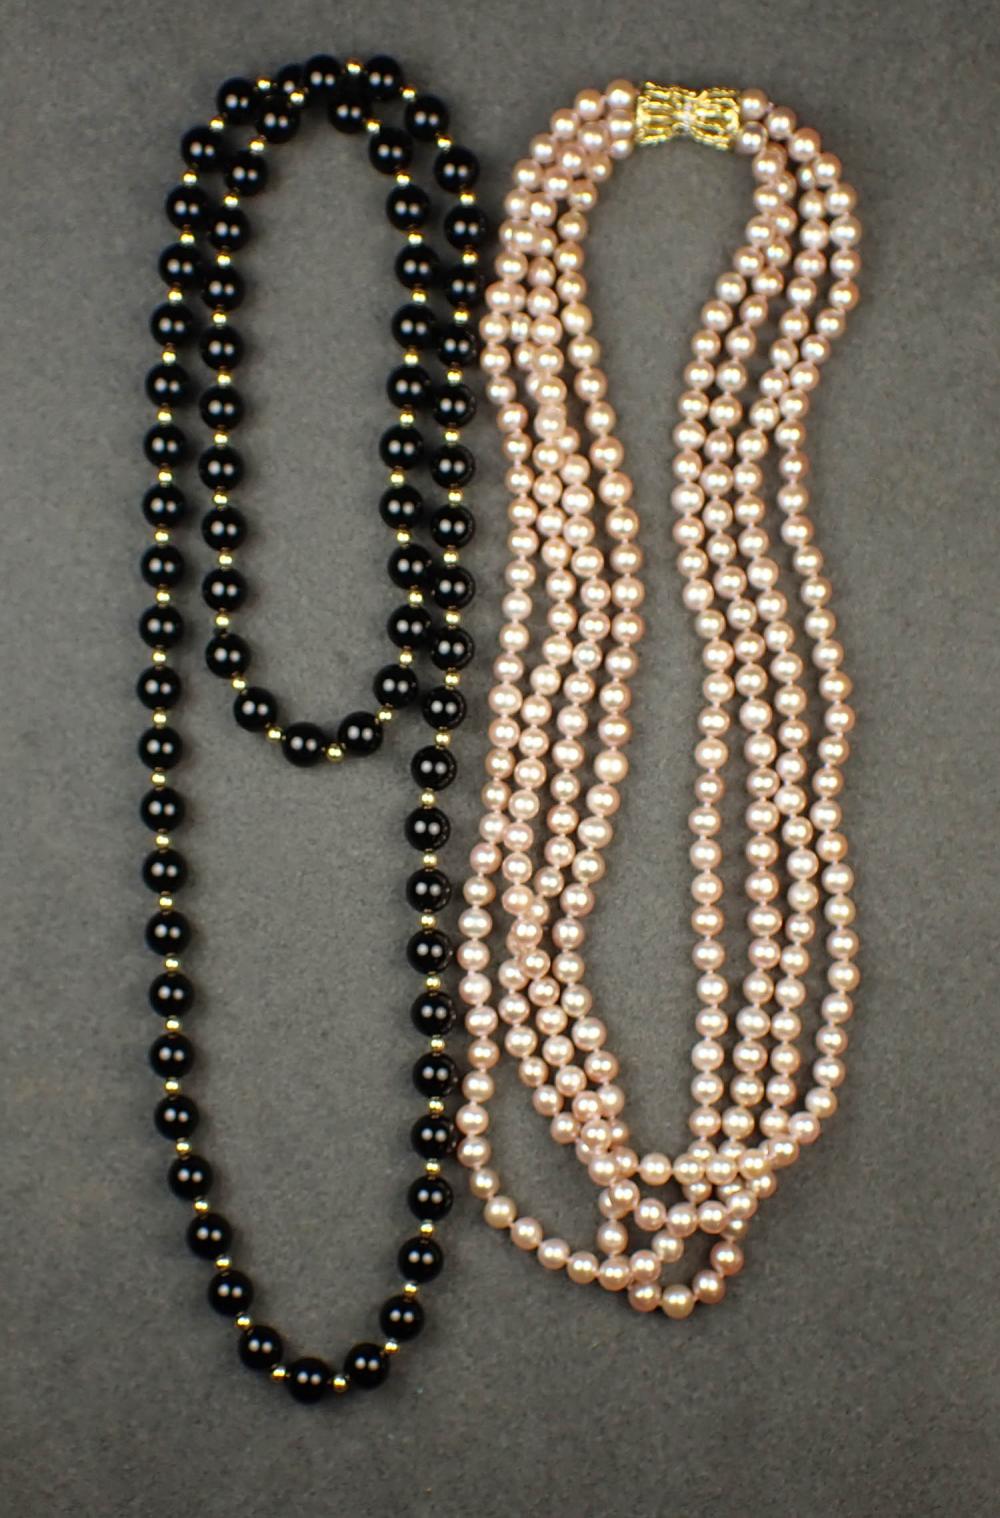 TWO MULTI STRAND BEAD NECKLACESTWO